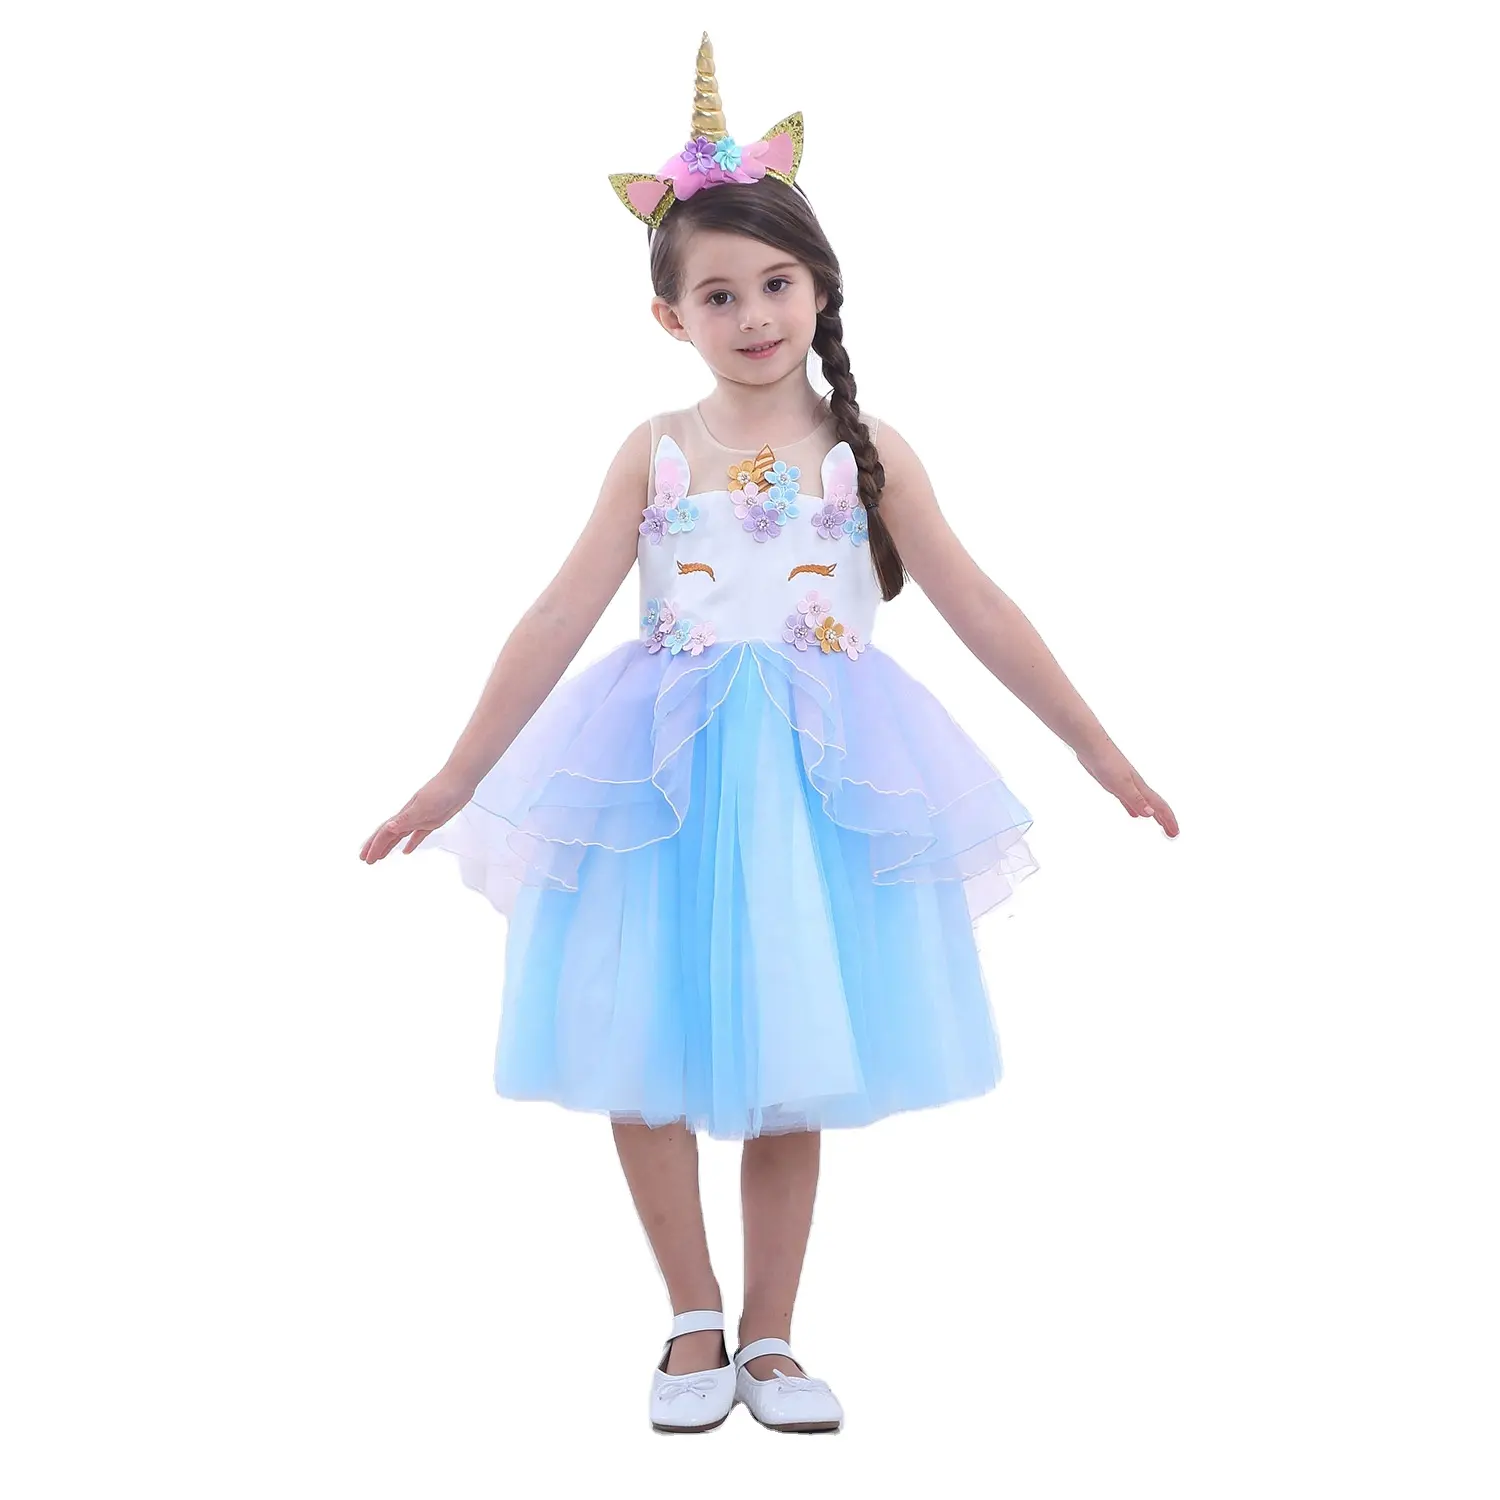 Hot sales Girl's Unicorn Dress Deluxe Princess Unicorn Dress For Party